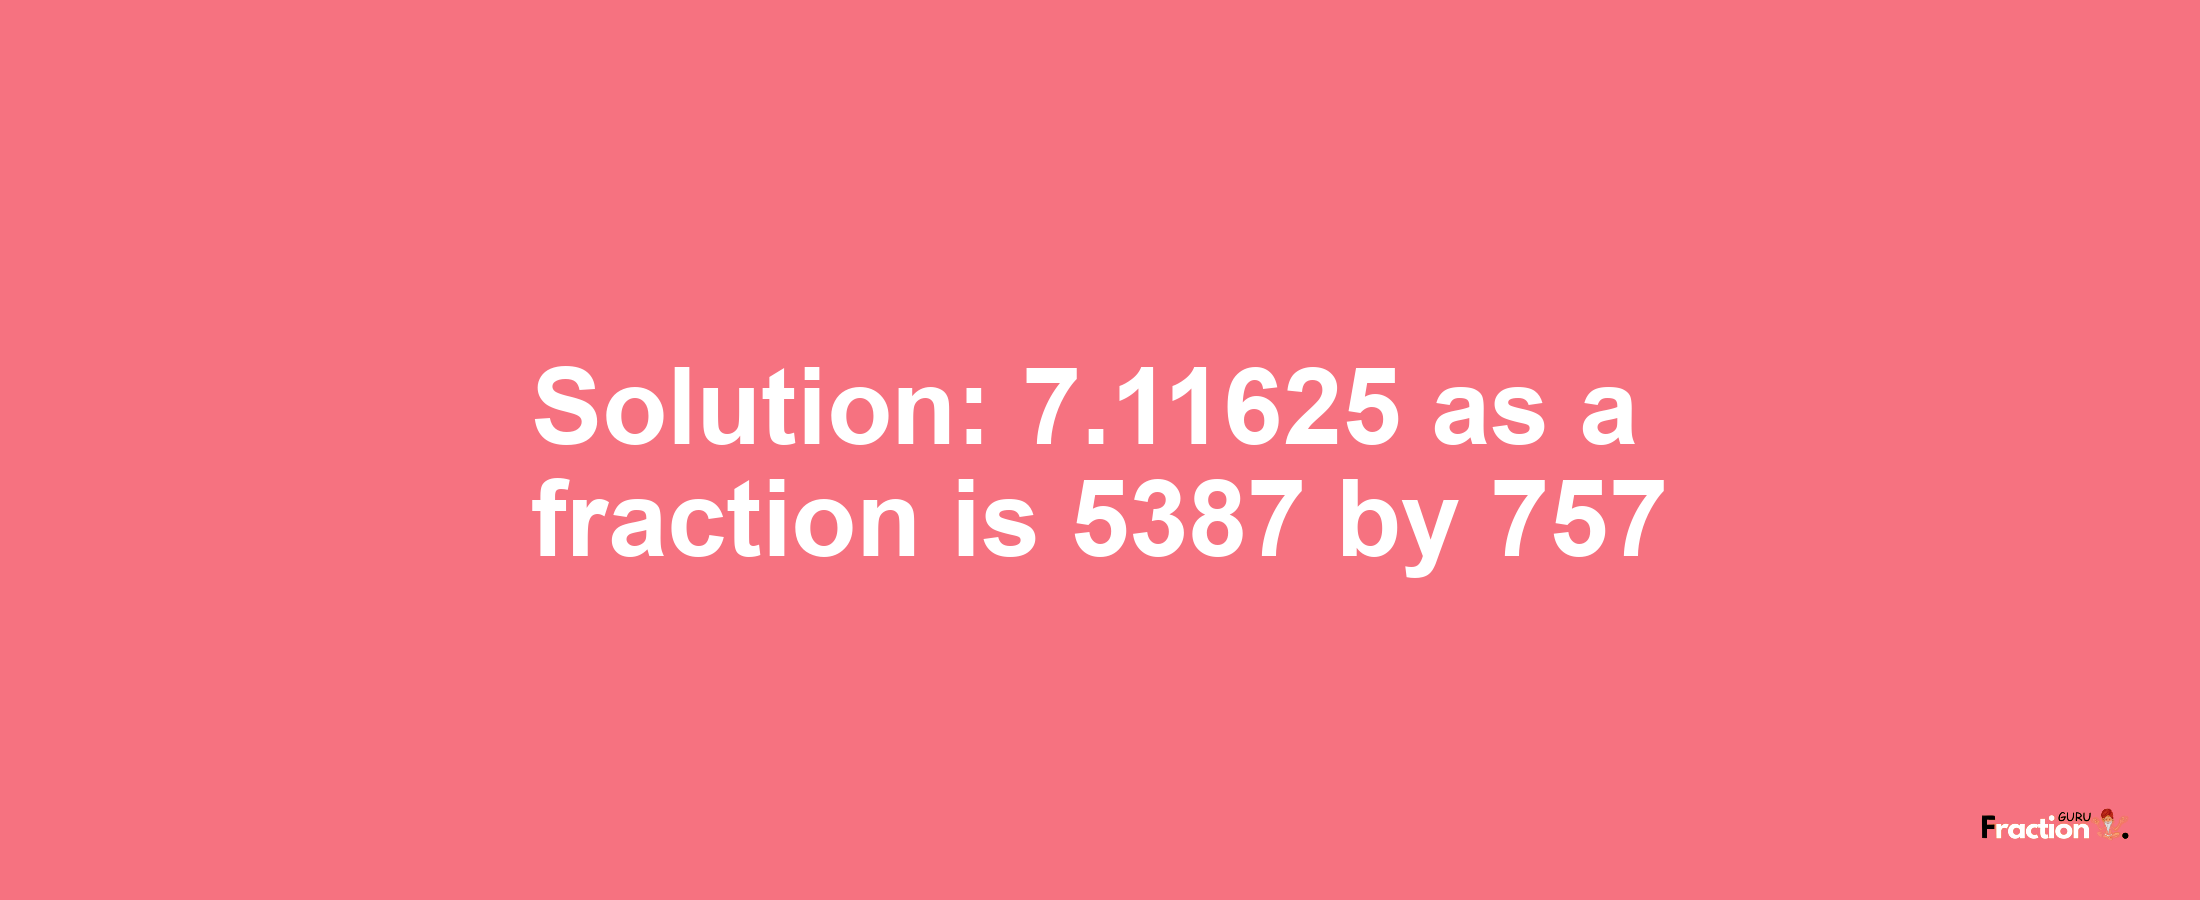 Solution:7.11625 as a fraction is 5387/757